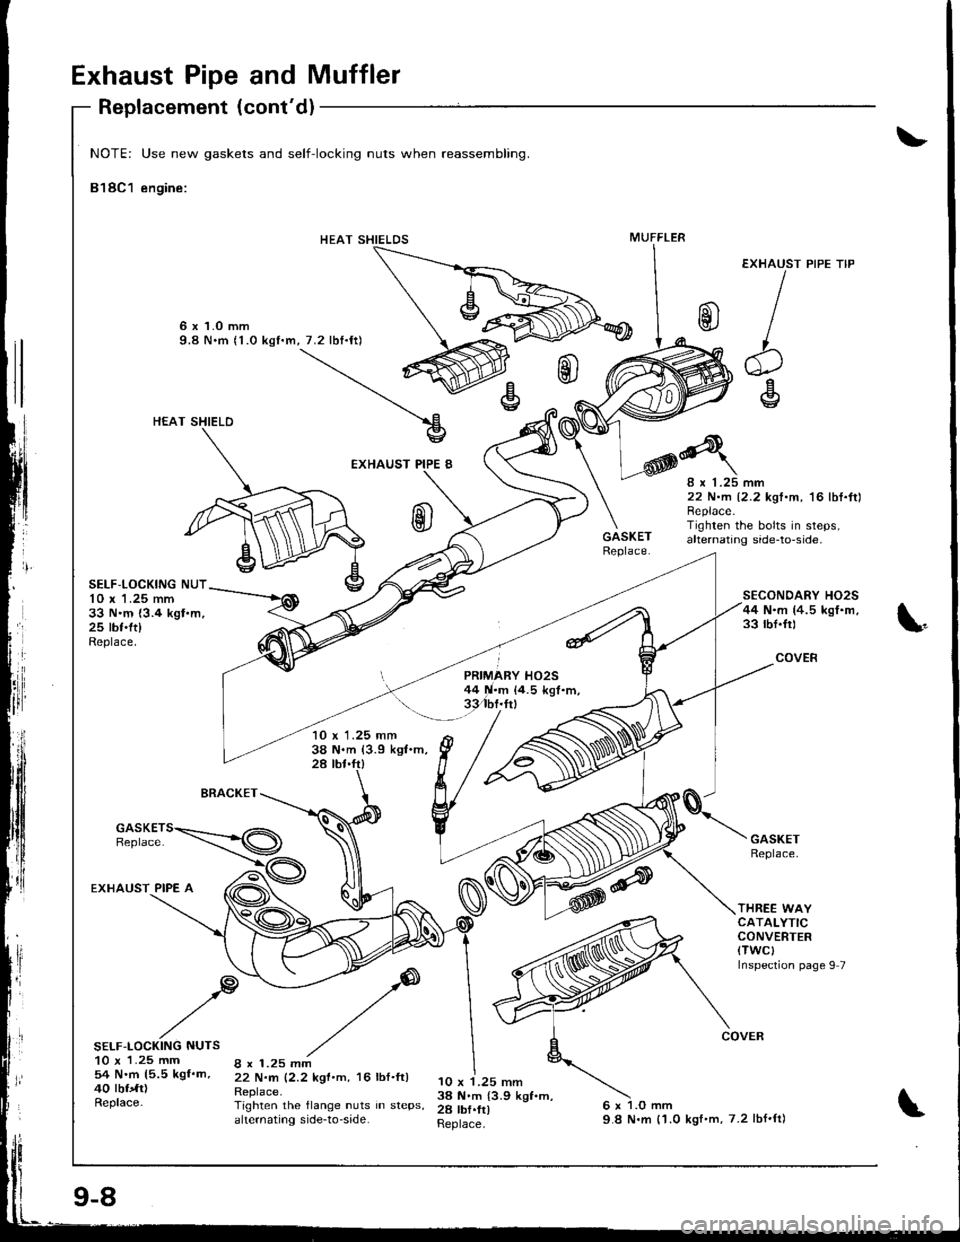 HONDA INTEGRA 1998 4.G Workshop Manual Exhaust Pipe and Muffler
EXHAUST
b
+l\v
rl
IIrl
NOTE: Use new gaskets and self-locking nuts when reassembling.
818C1 engine:
6 x 1.O mm9.8 N.m (1.0 kgf.m, 7.2 lbf.ft)
HEAT SHIELD
EXHAUST PIPE 8
Repla